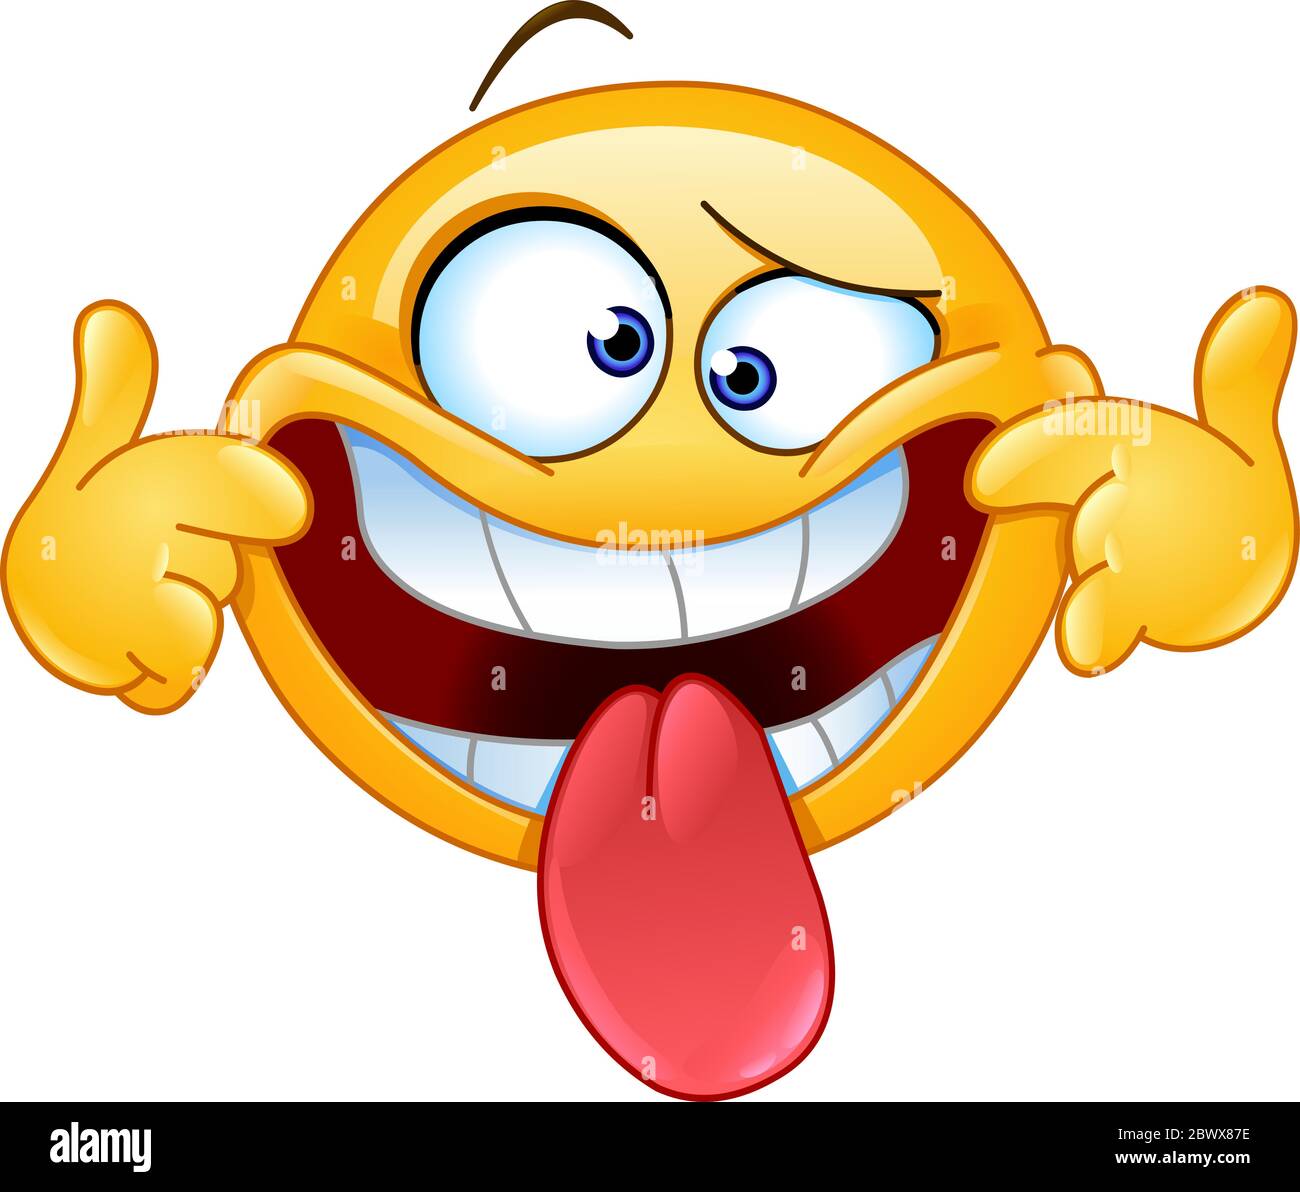 Emoticon making a funny face Stock Vector